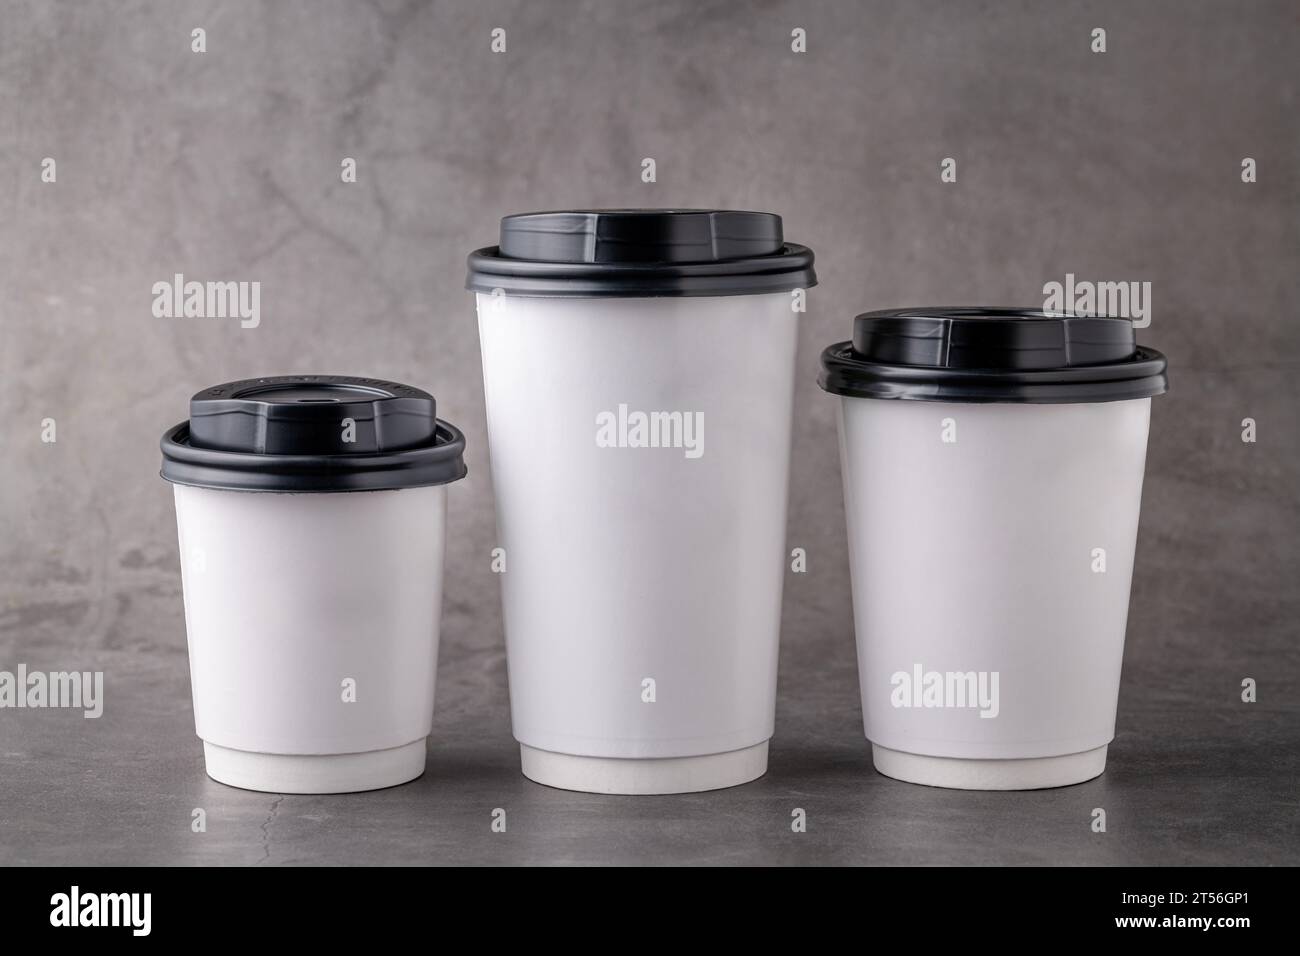 12 Ounce Disposable Paper Coffee Hot Cups with Black Lids - 50 Sets - Coffee Latte Macchiato to Go Medium Portion